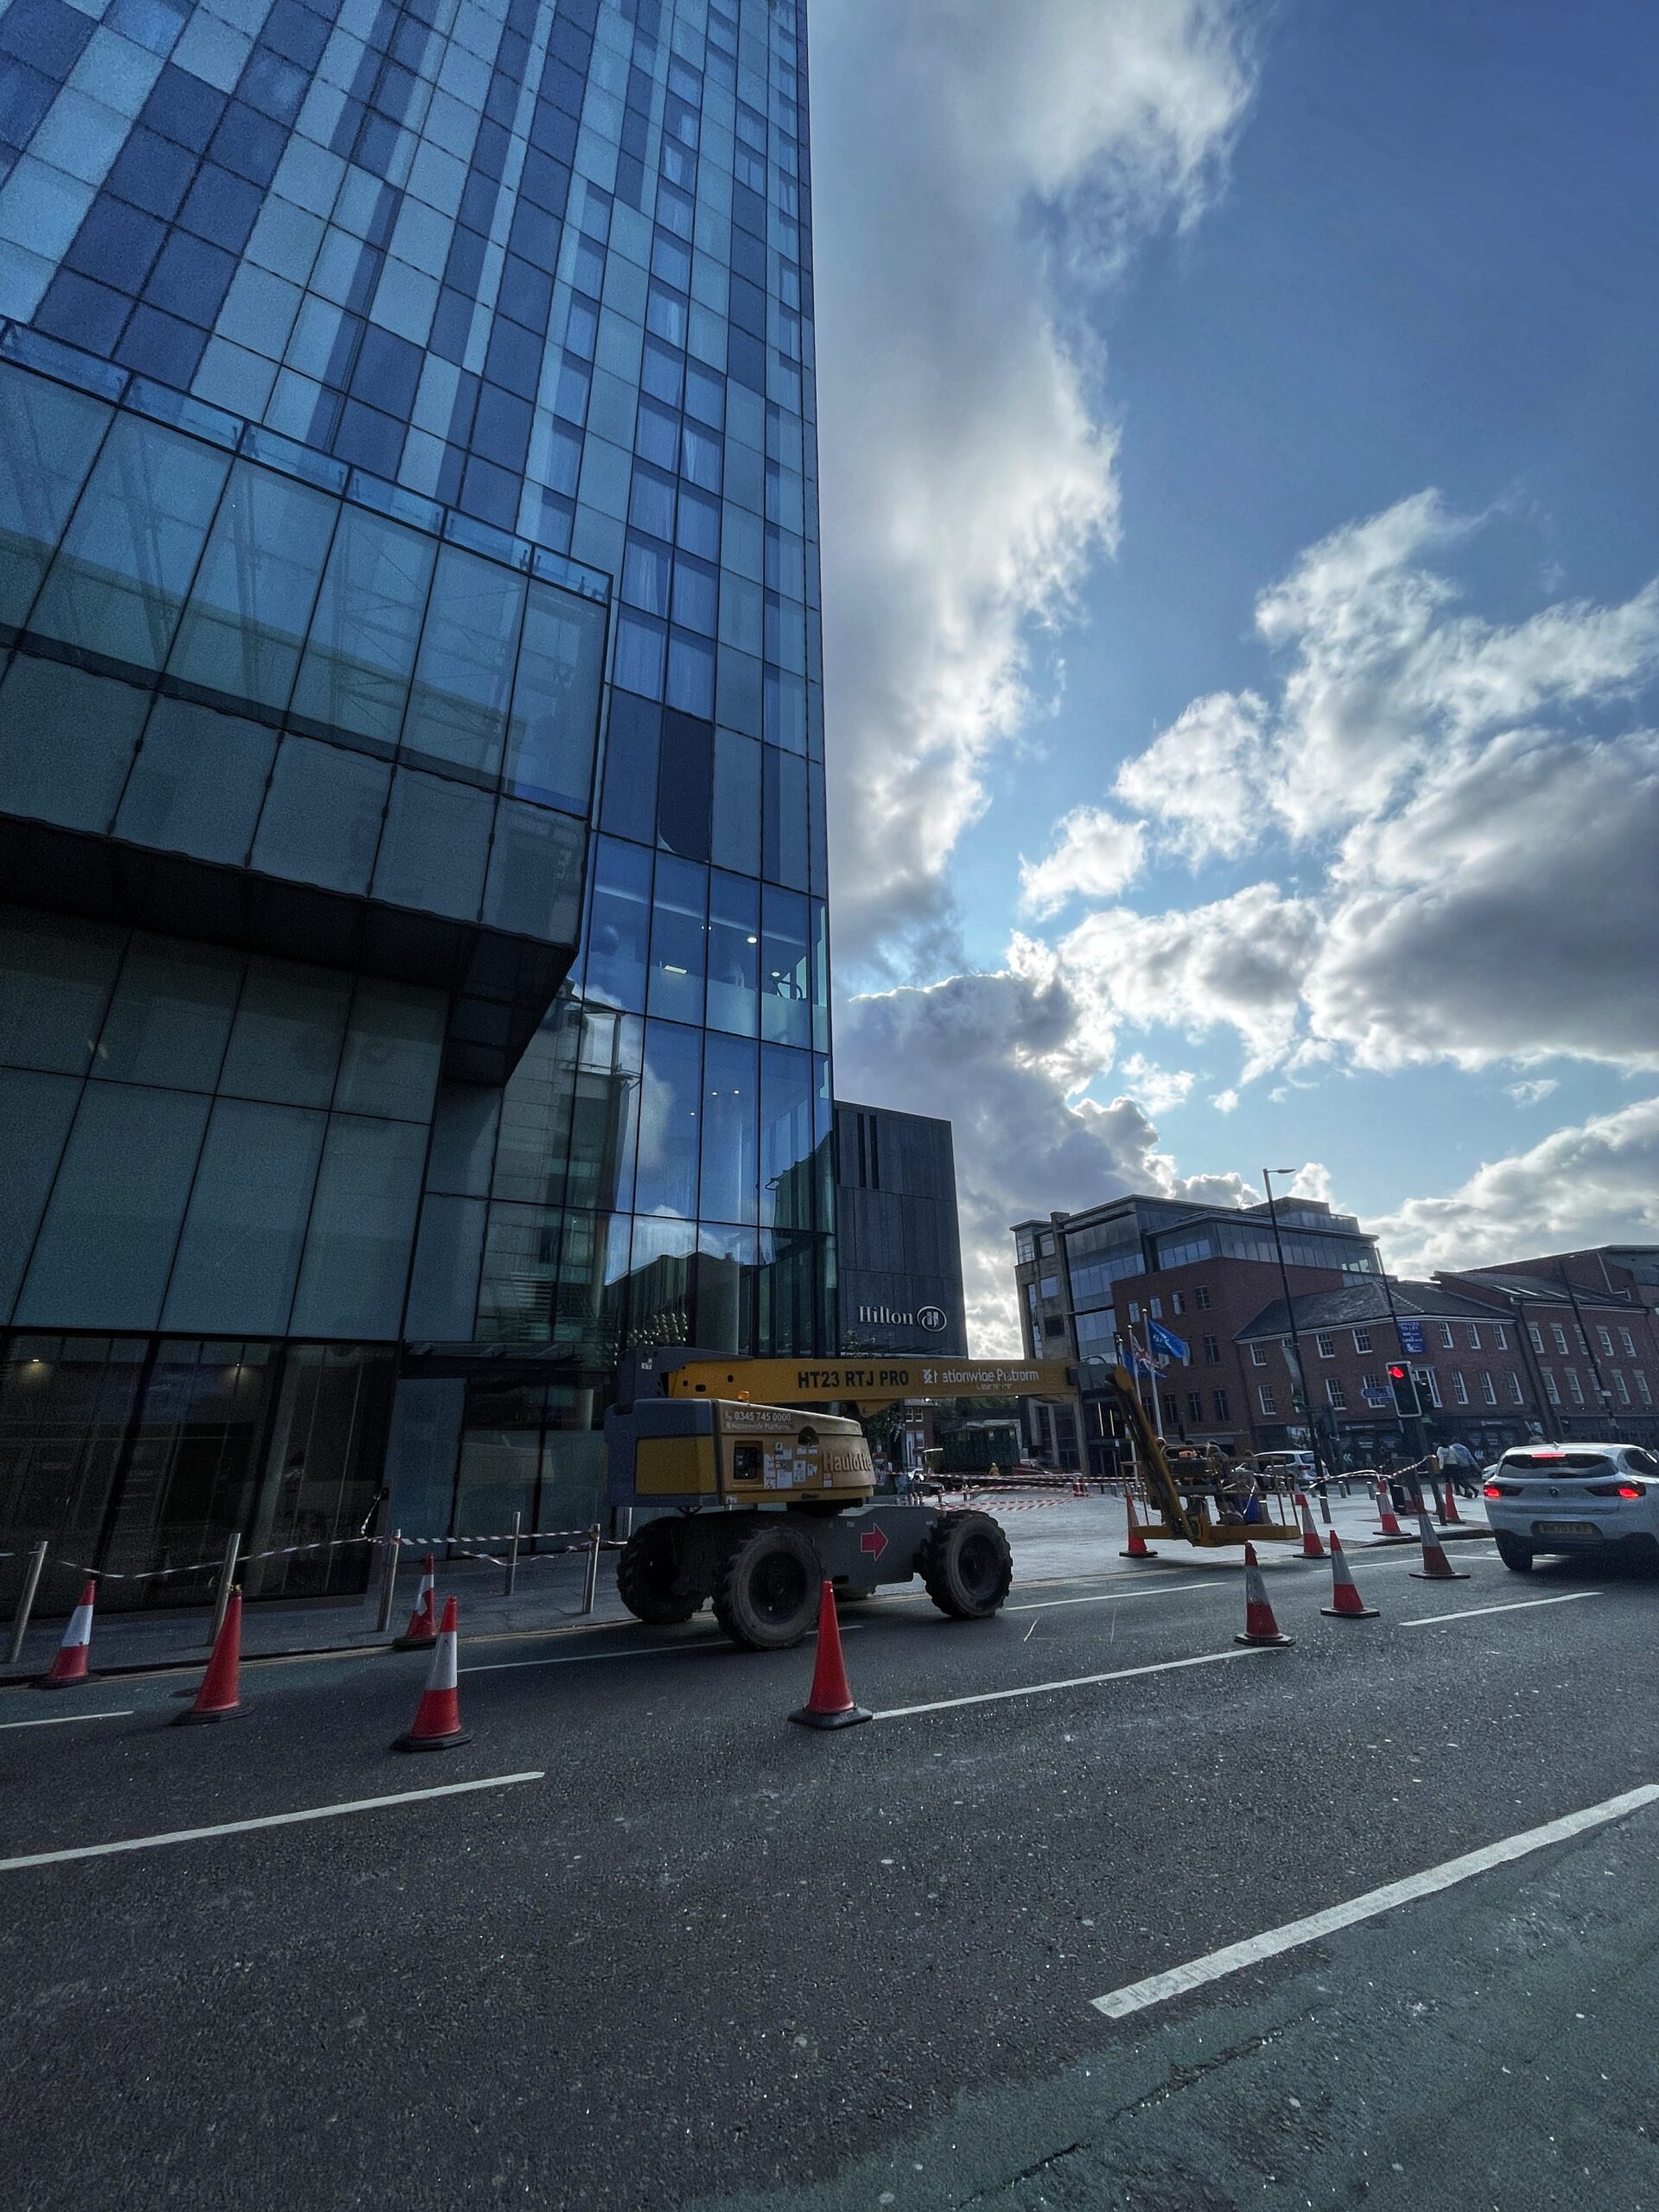 Huge pane of glass falls from Beetham Tower and shatters onto street below